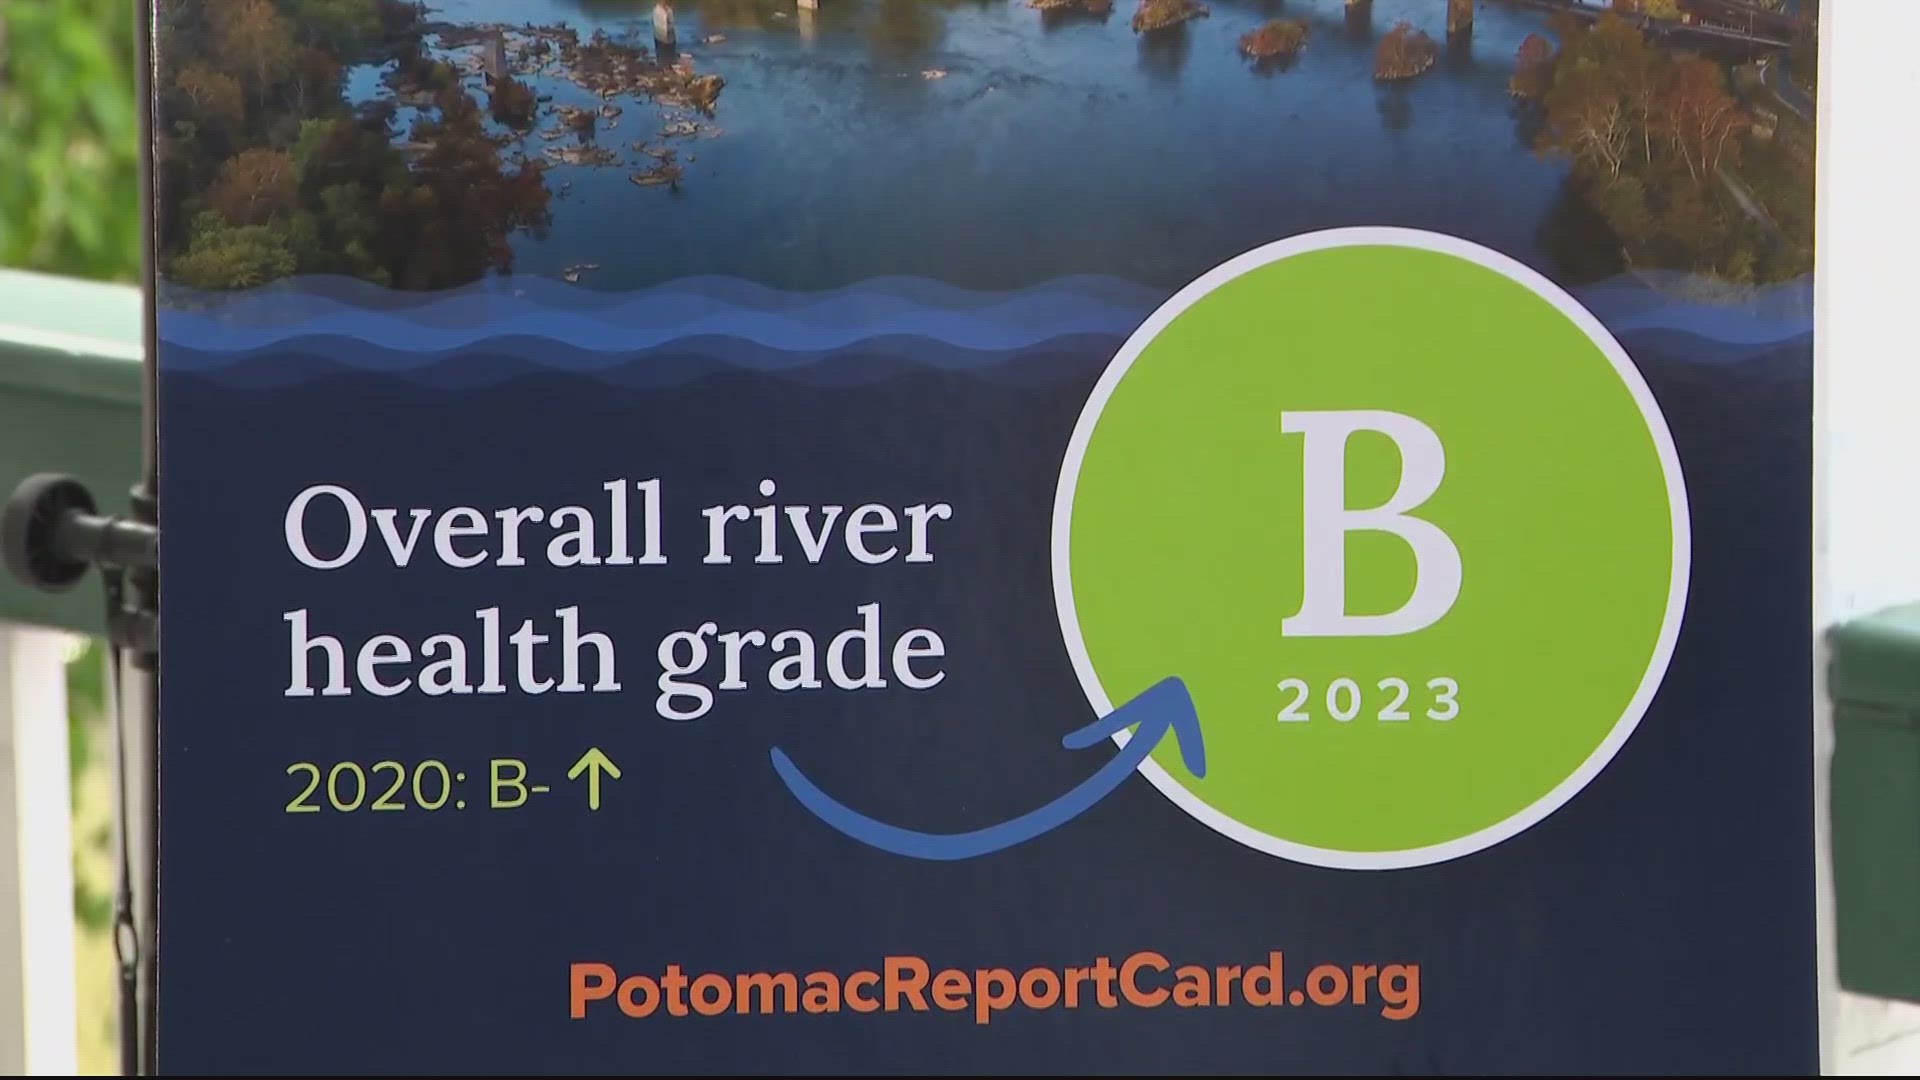 The Potomac River received a B for 2022. This grading system is done to see how well the Potomac is holding up to the goals laid out in the 1972 Clean Water Act.